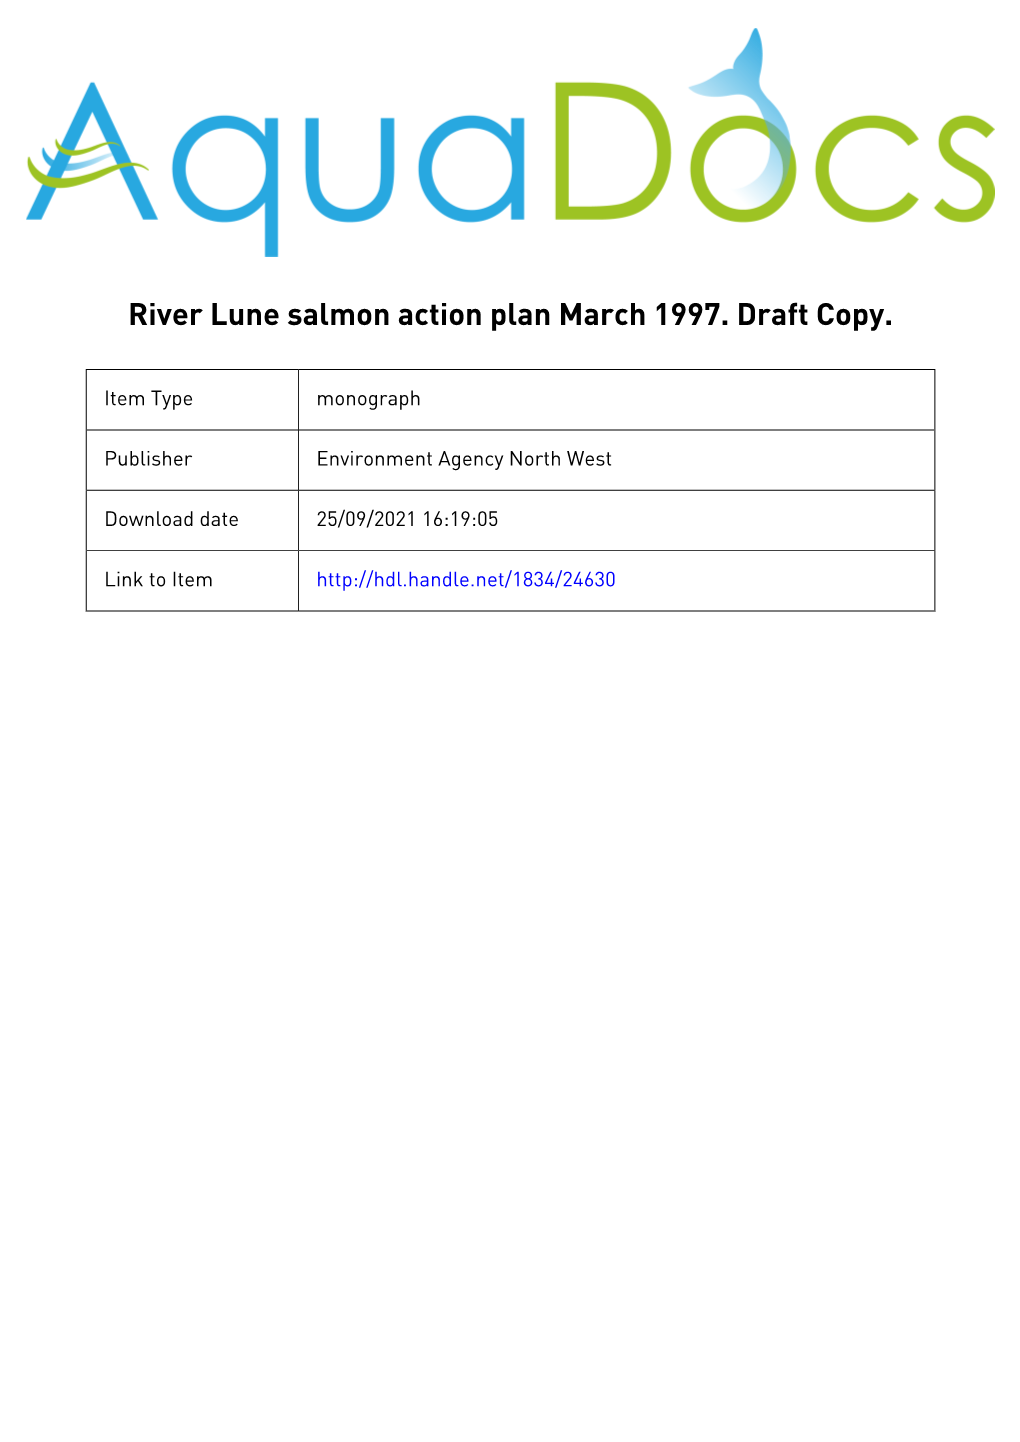 River Lune Salmon Action Plan March 1997 Draft Copy Executive Summary